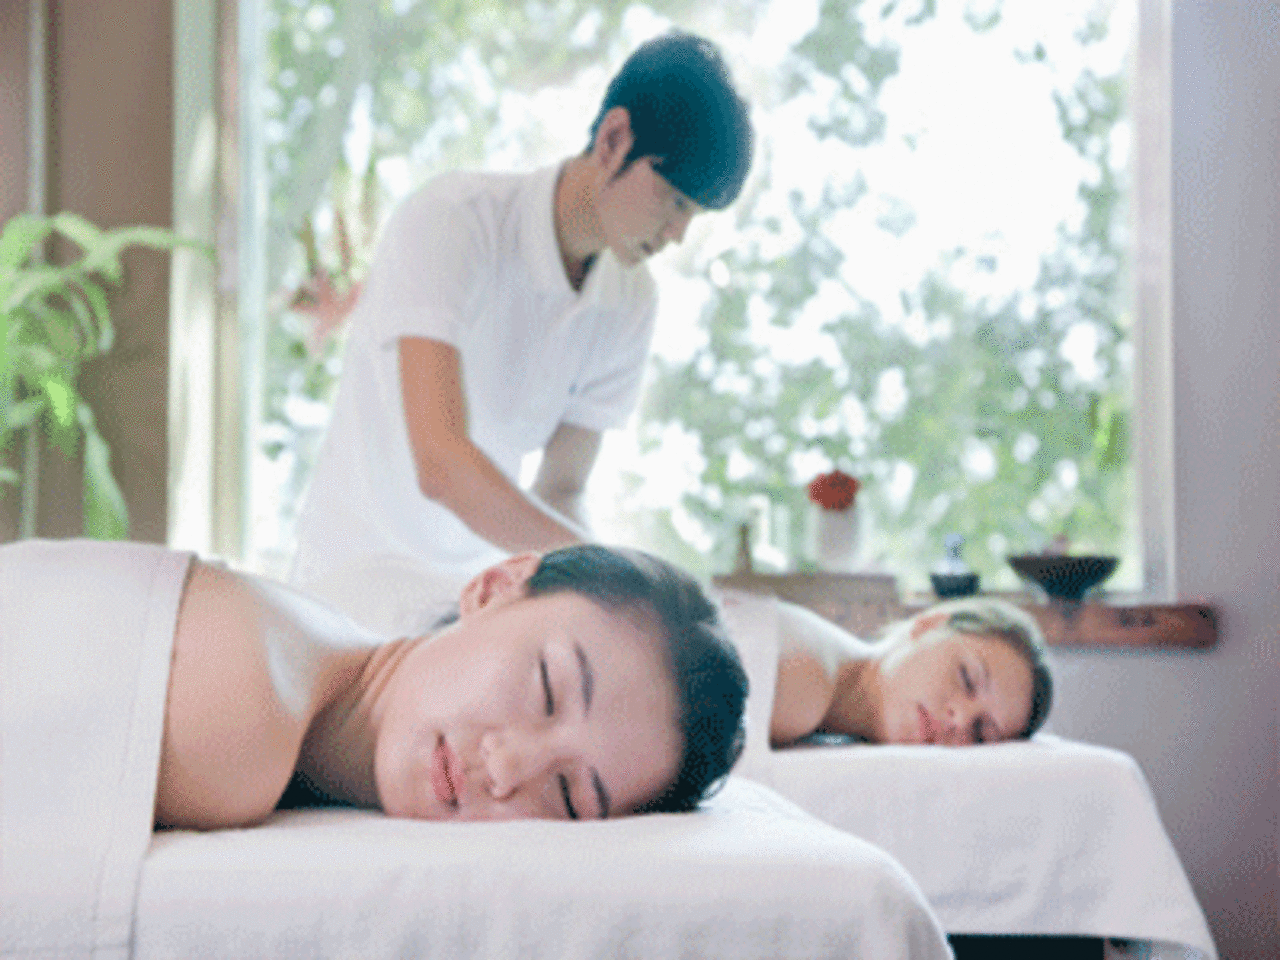 Quickies and cross gender spa massages find takers in the city pic